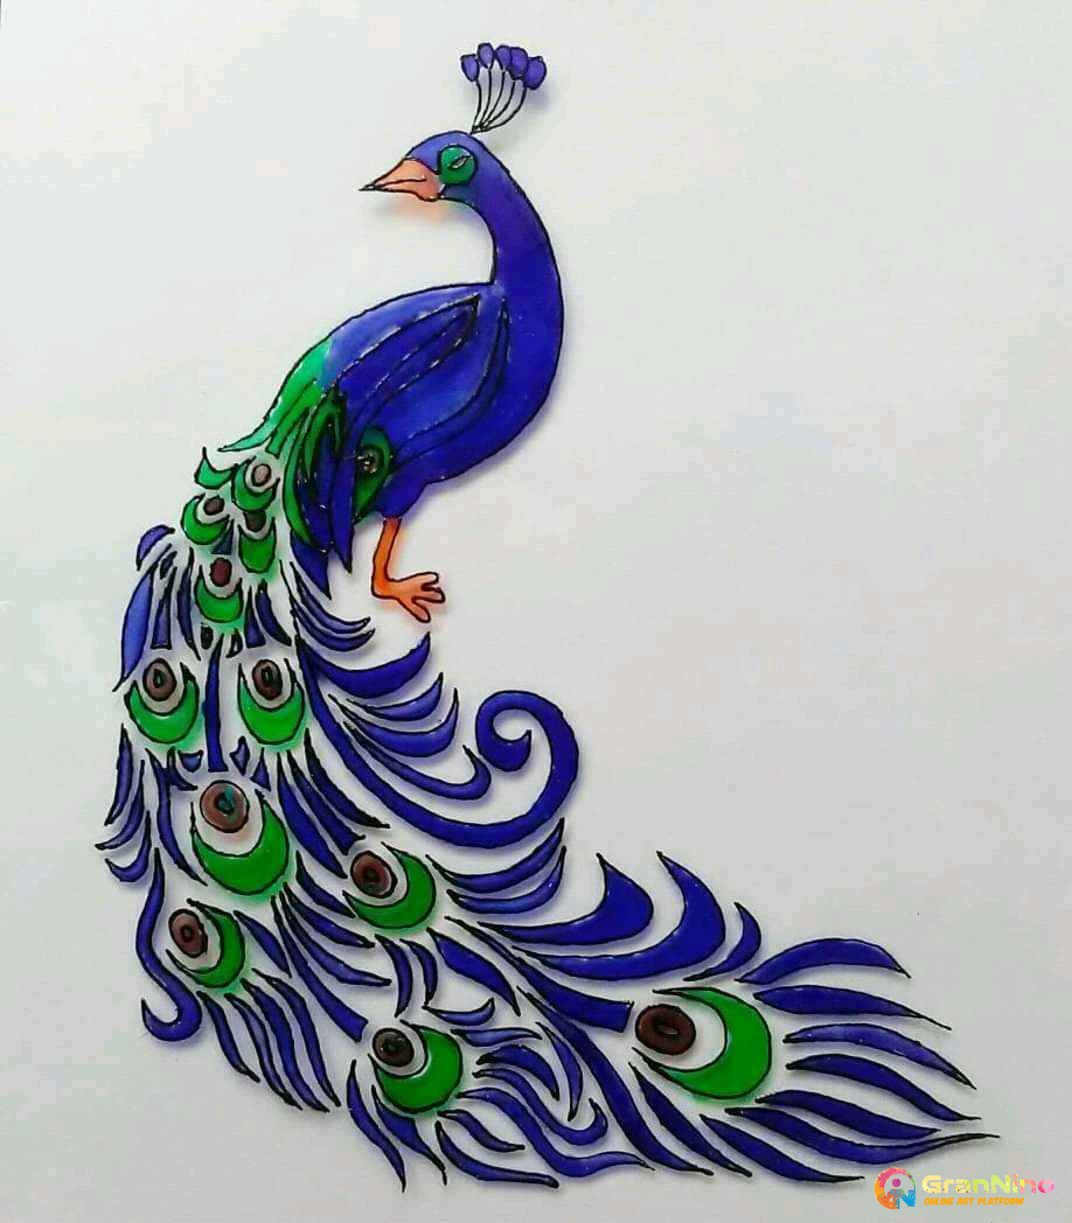 Calligraphy | Art | Drawing | Painting | Reshmi Nair On Art: Glass painting  designs and patterns